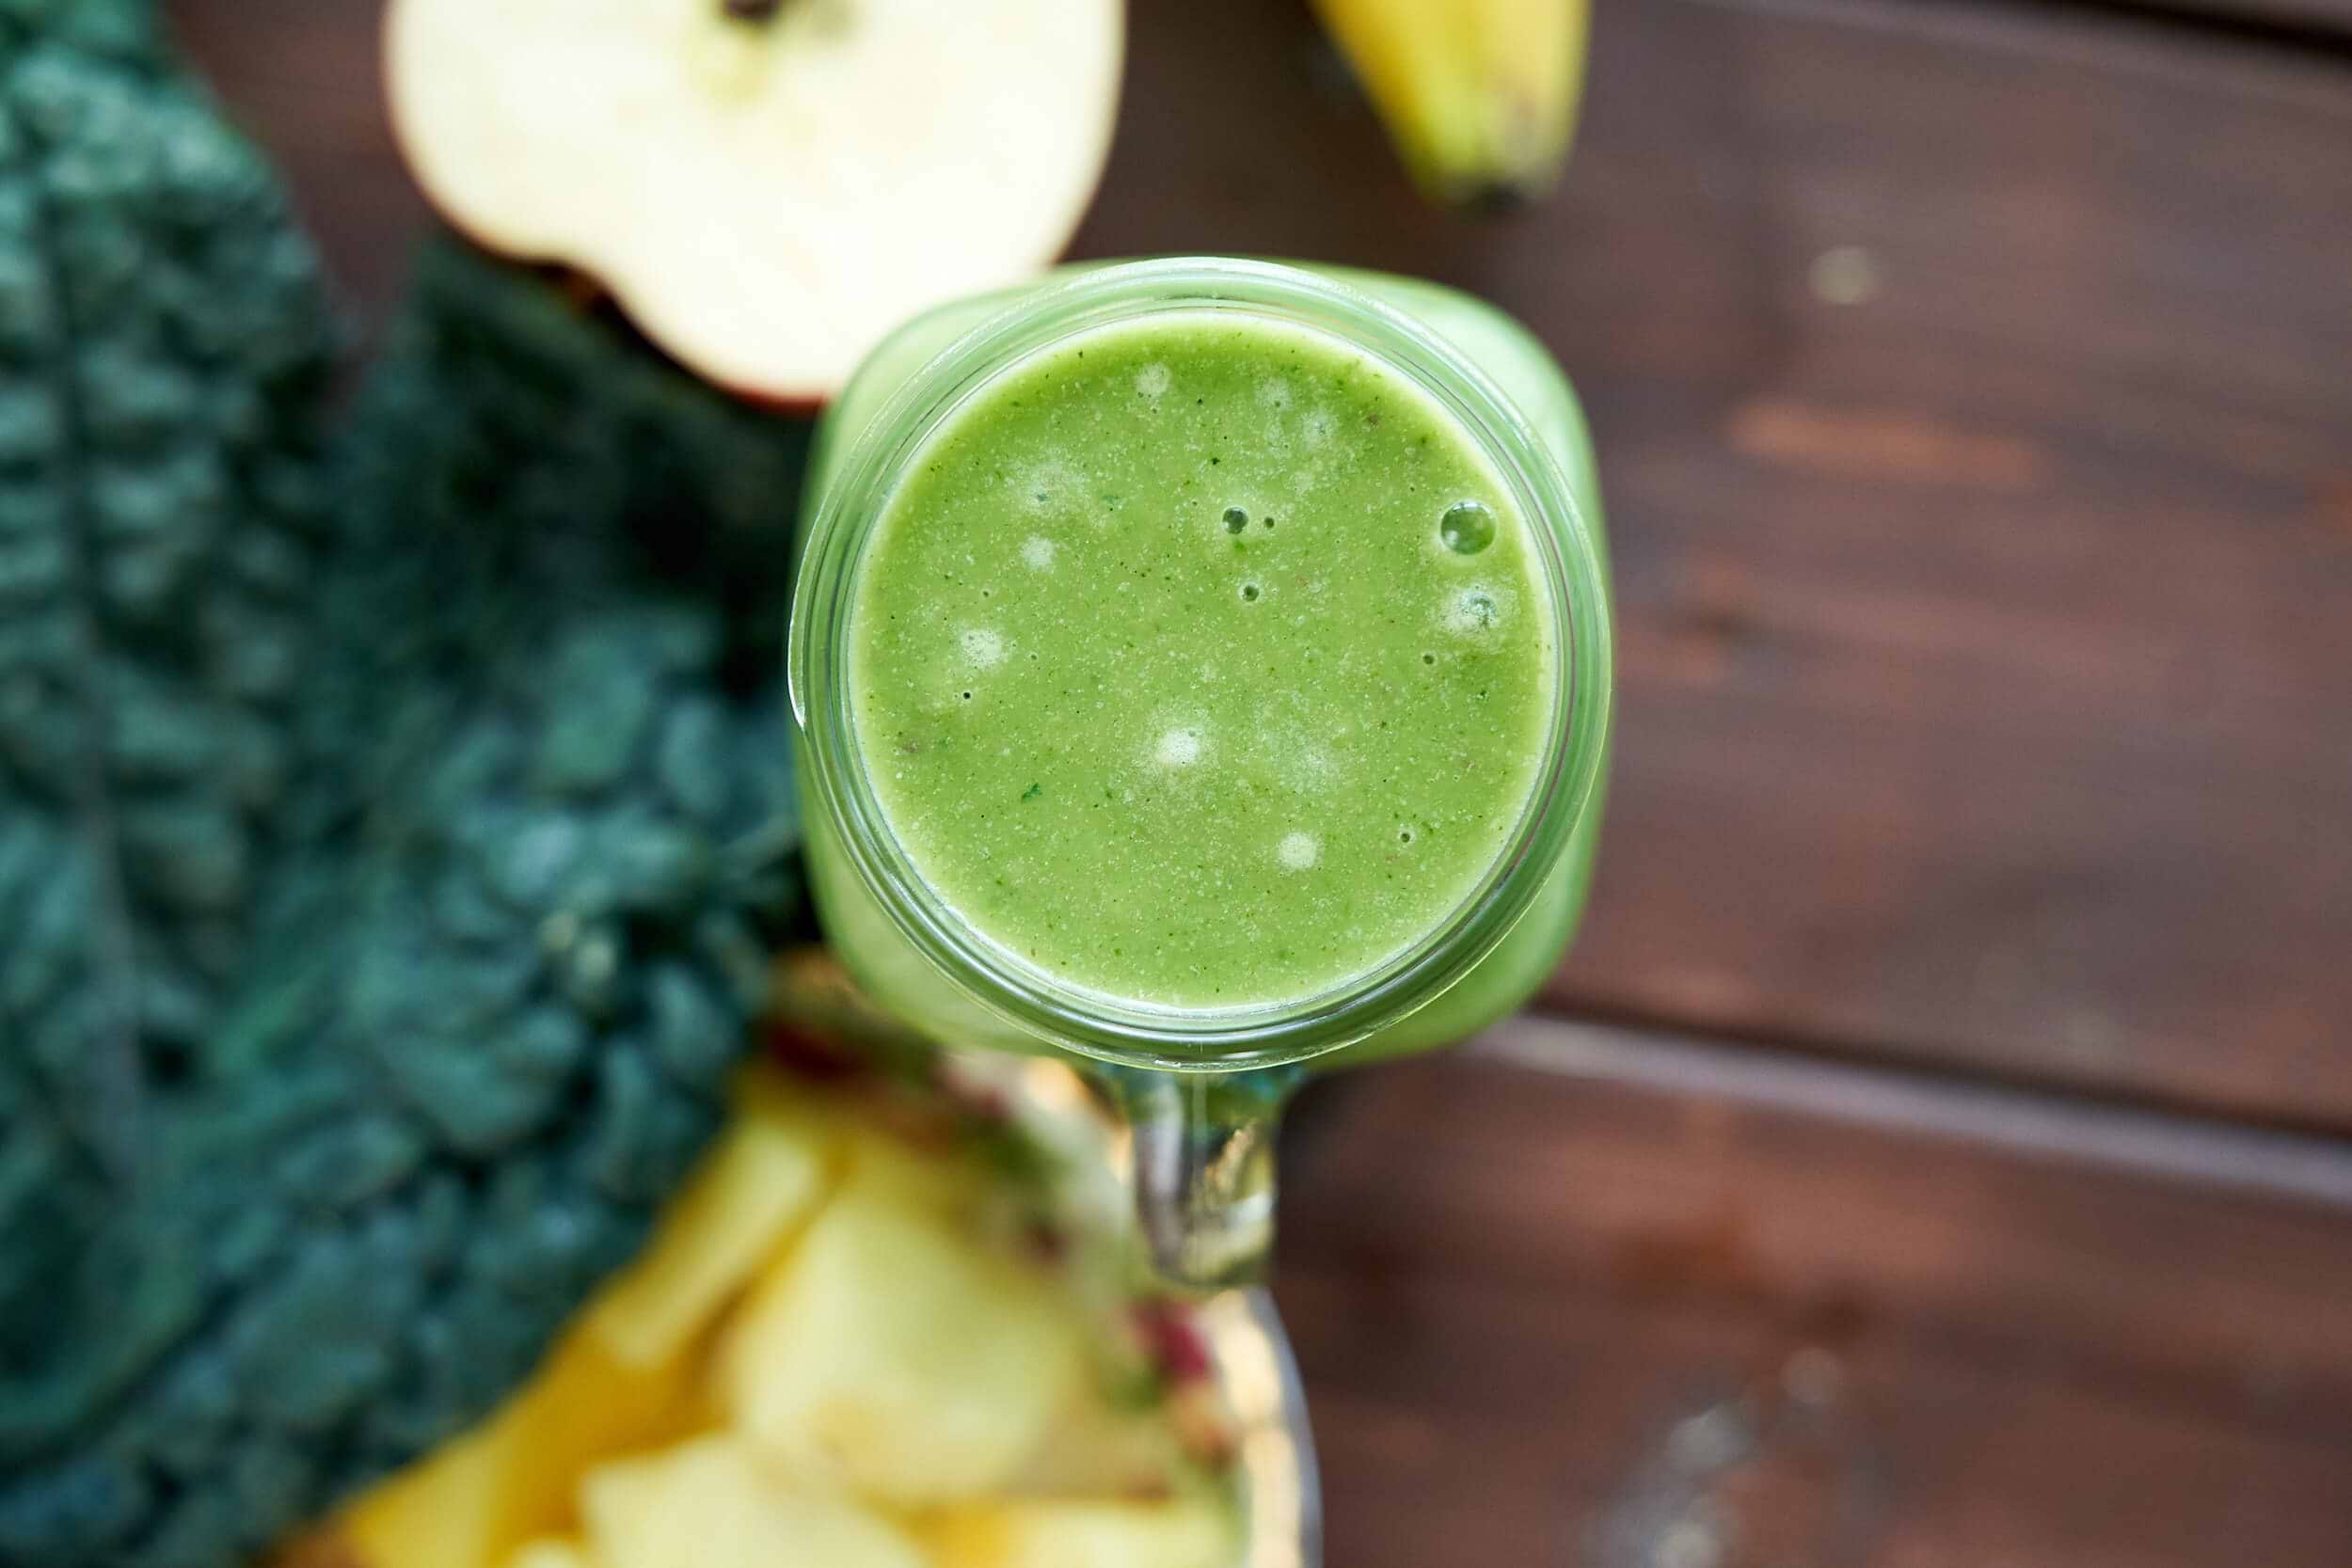 Green Smoothie with Kale, Pineapple and Banana Ingredients